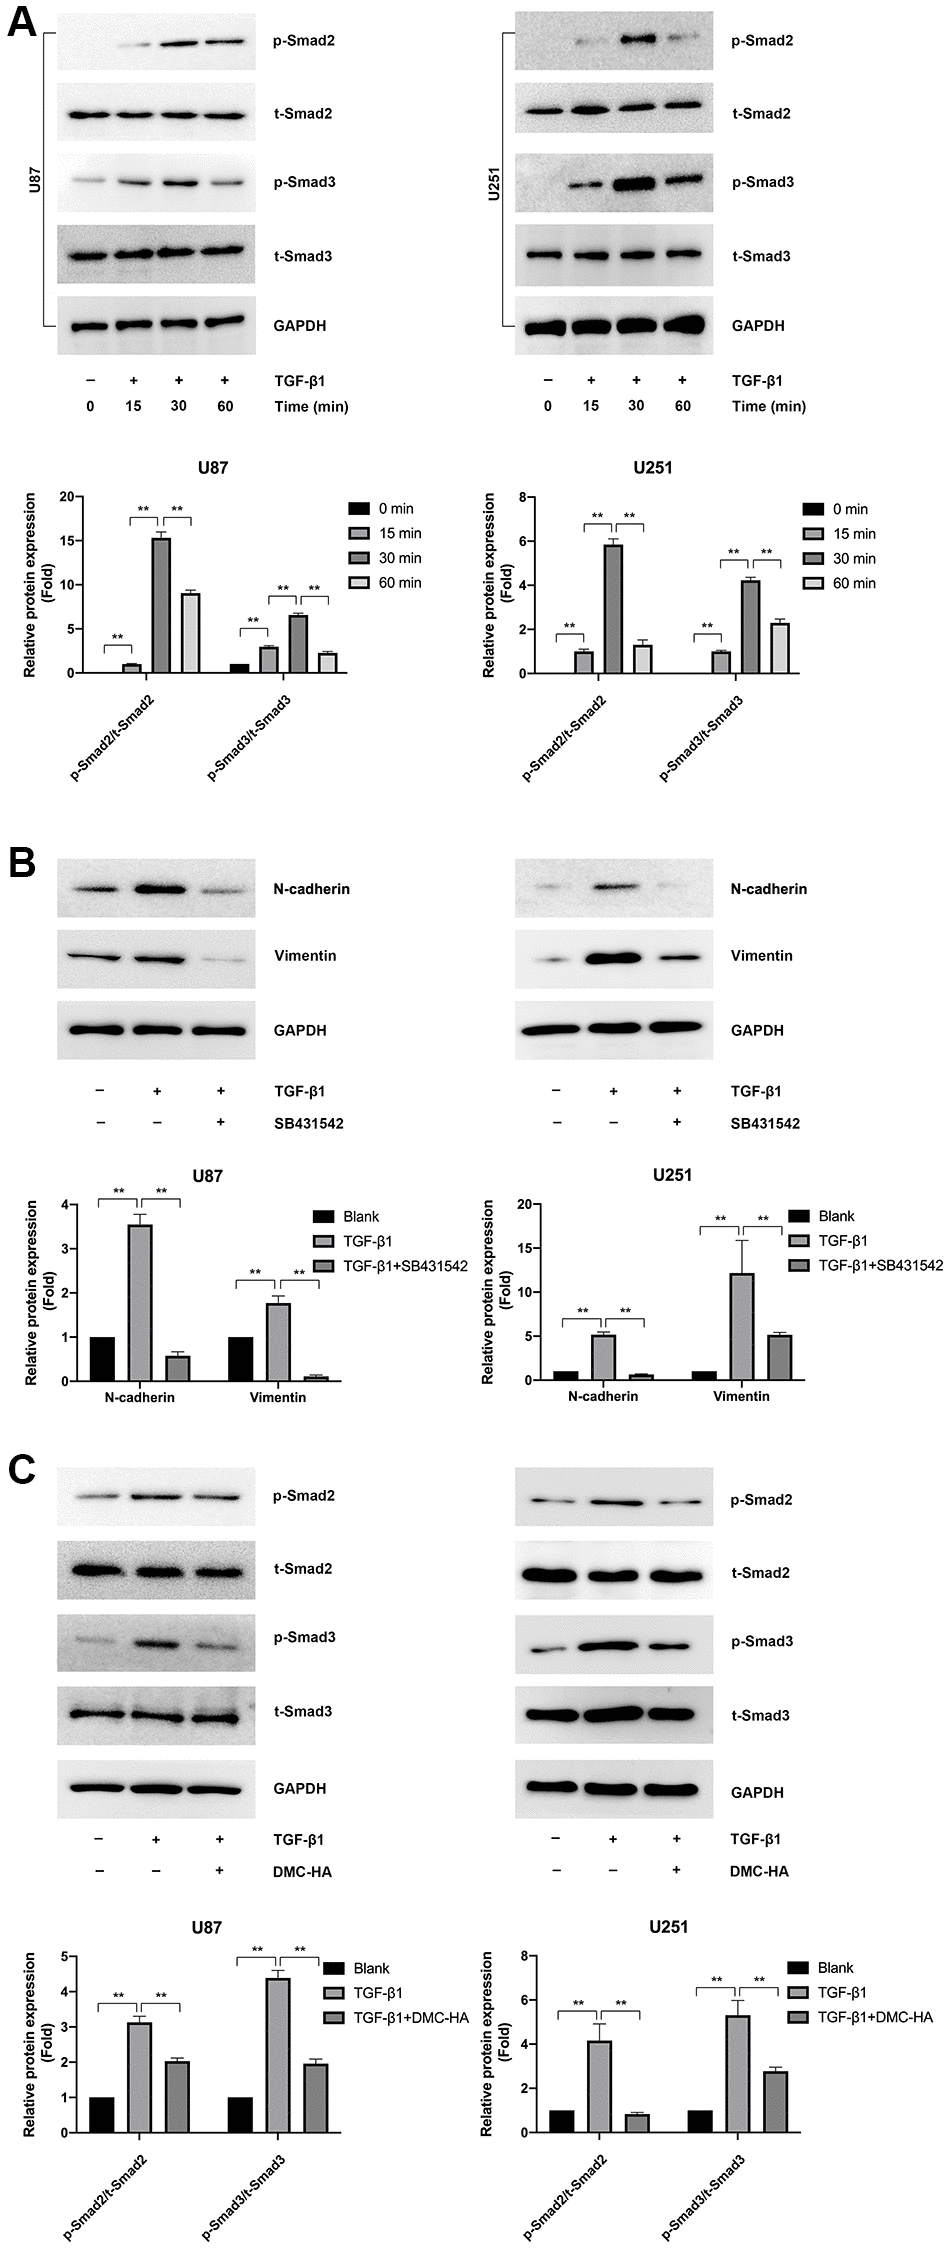 Effects of DMC-HA on the Smad pathway in glioma cells. (A) Western blot analysis was conducted to assess the expression of p-Smad2 and p-Smad3 after a 60-minute treatment with TGF-β1. (B) Western blot analysis was employed to examine the expression of N-cadherin and Vimentin following combined treatment with TGF-β1 and SB431542. (C) Western blot analysis was performed to evaluate the phosphorylation of Smad2 and Smad3 after co-treatment with TGF-β1 and DMC-HA.